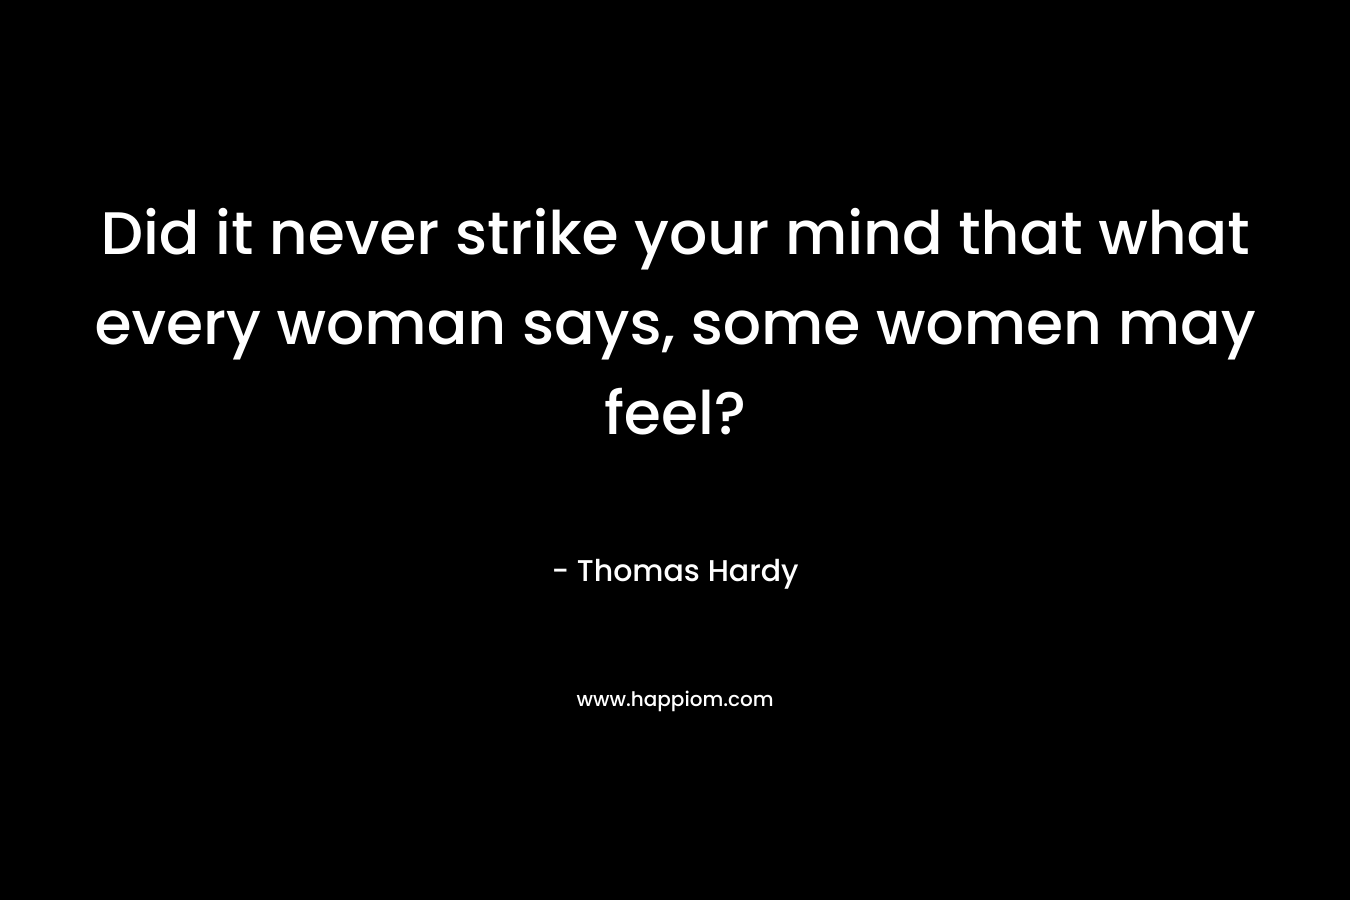 Did it never strike your mind that what every woman says, some women may feel?